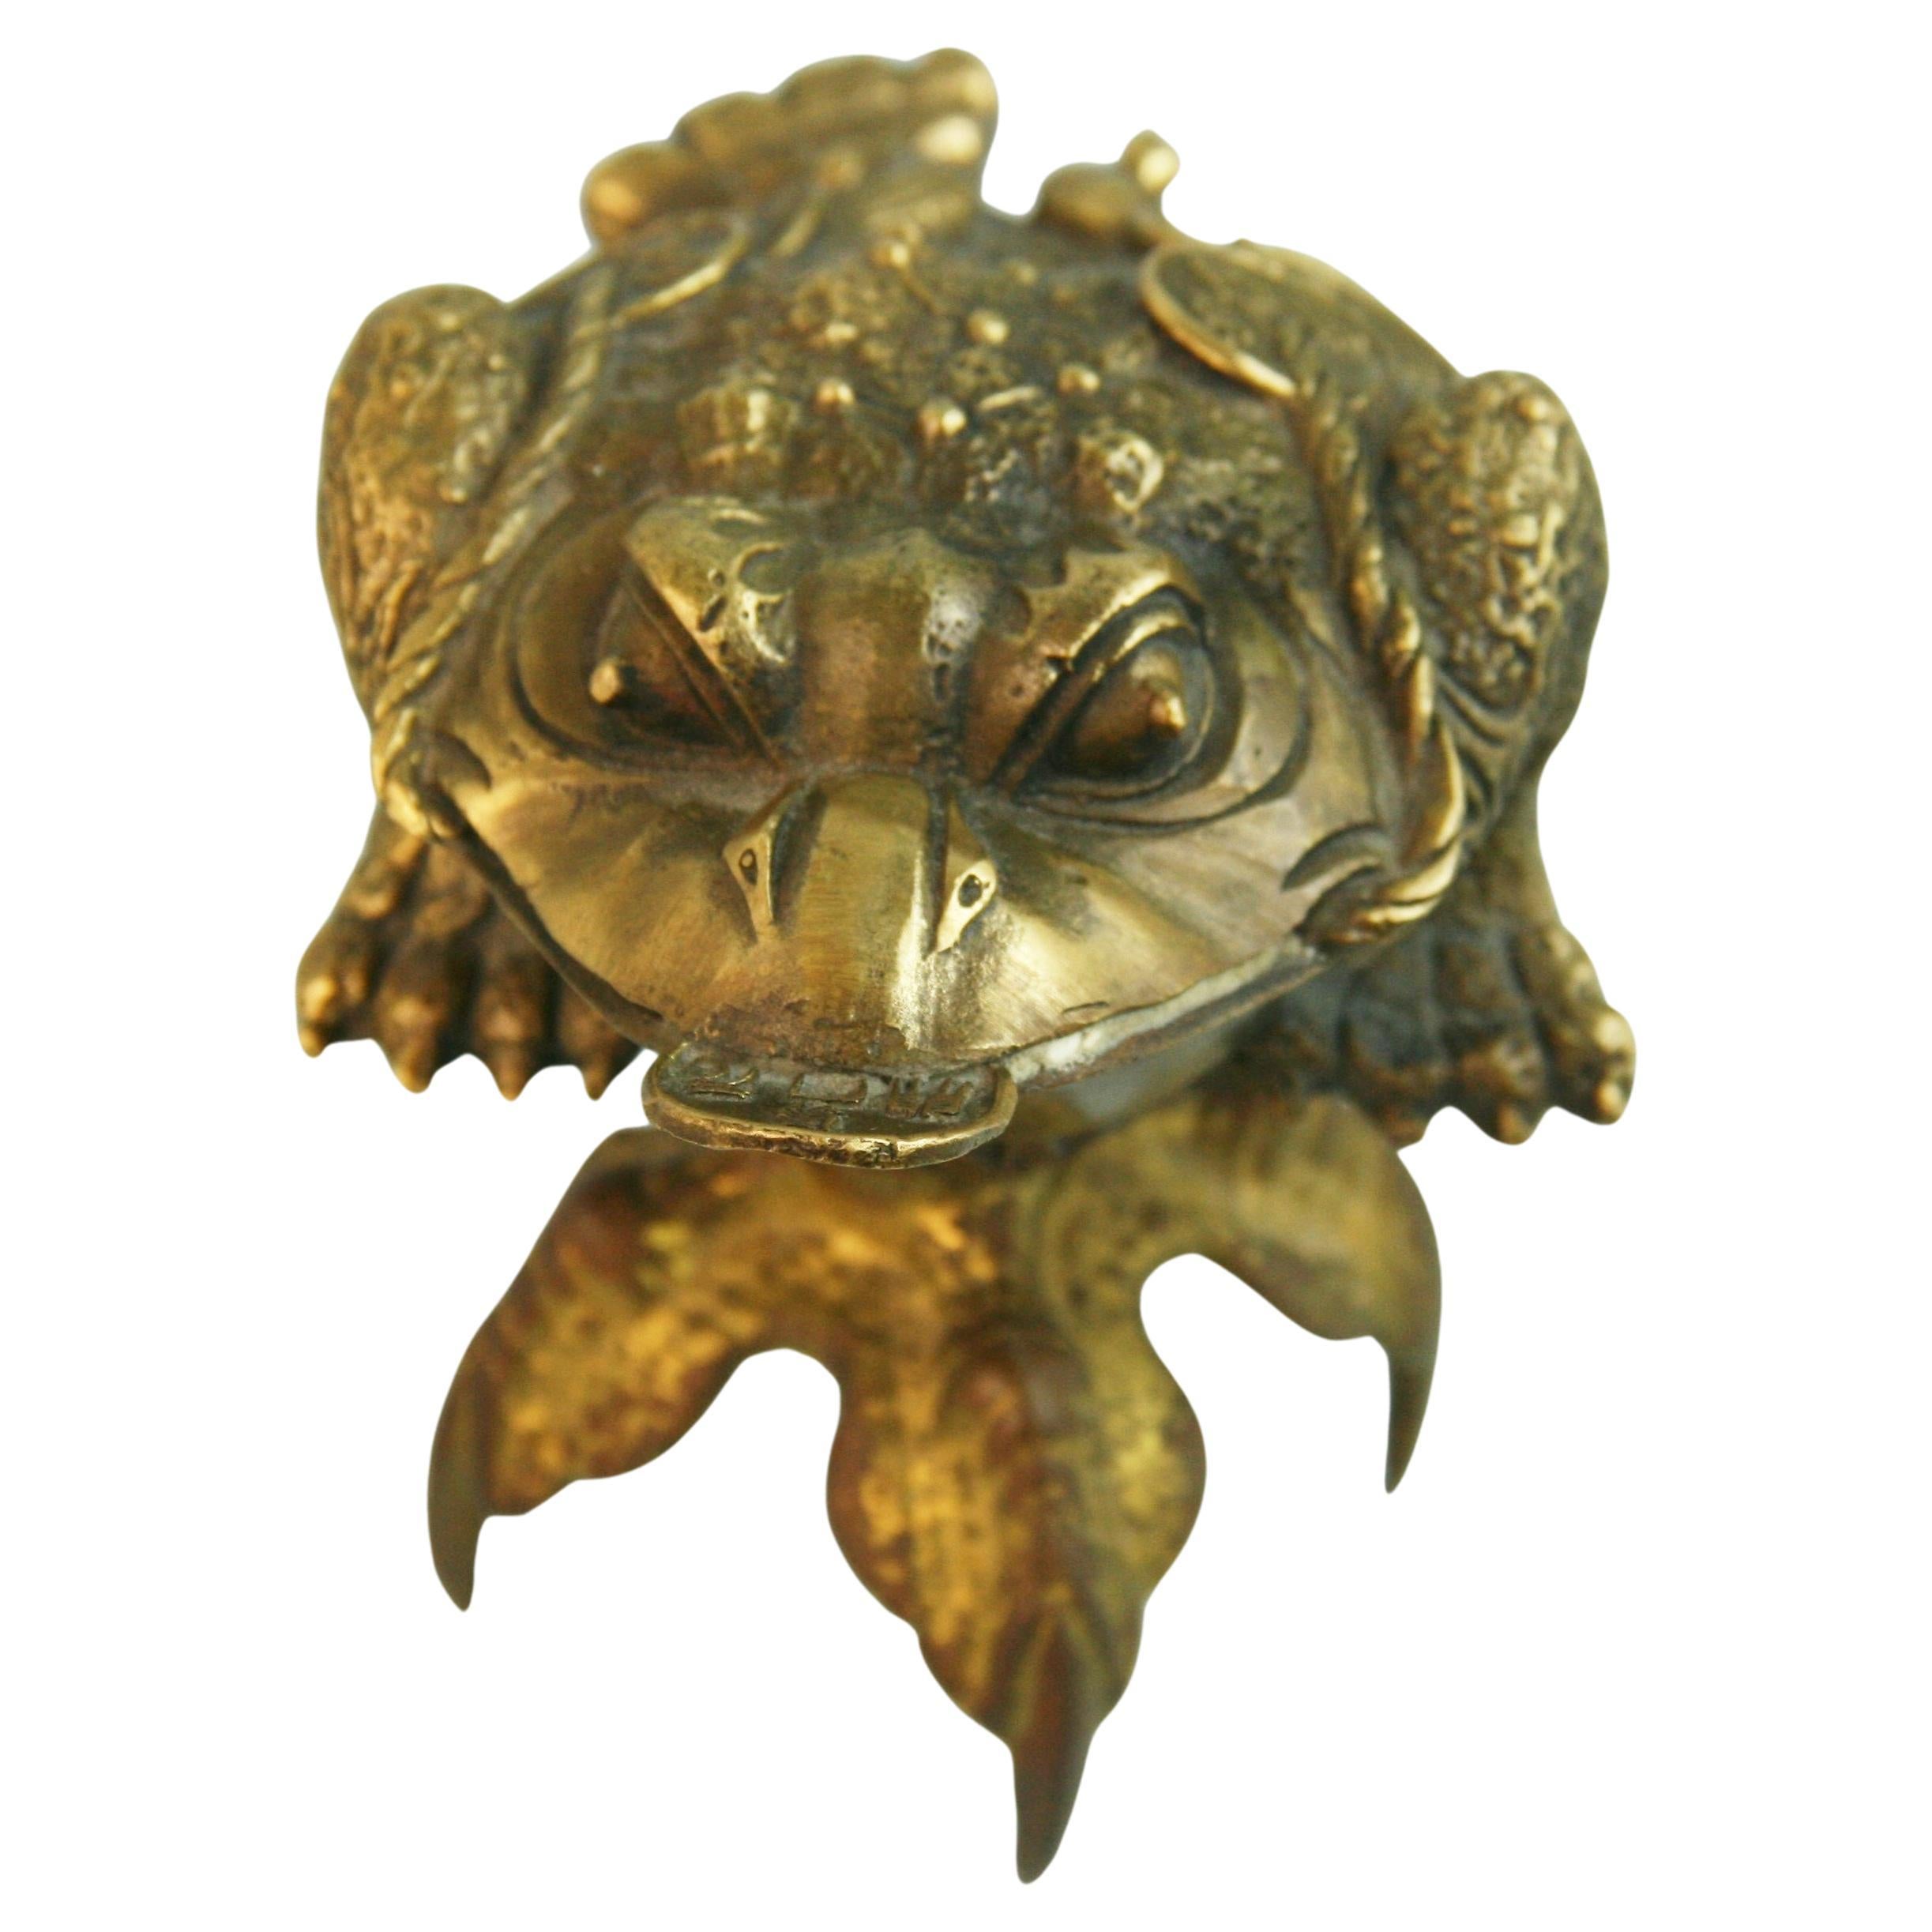 1186 Japanese three legged money frog Jin Chan in bronze on removable stand.
Charm for wealth and prosperity.